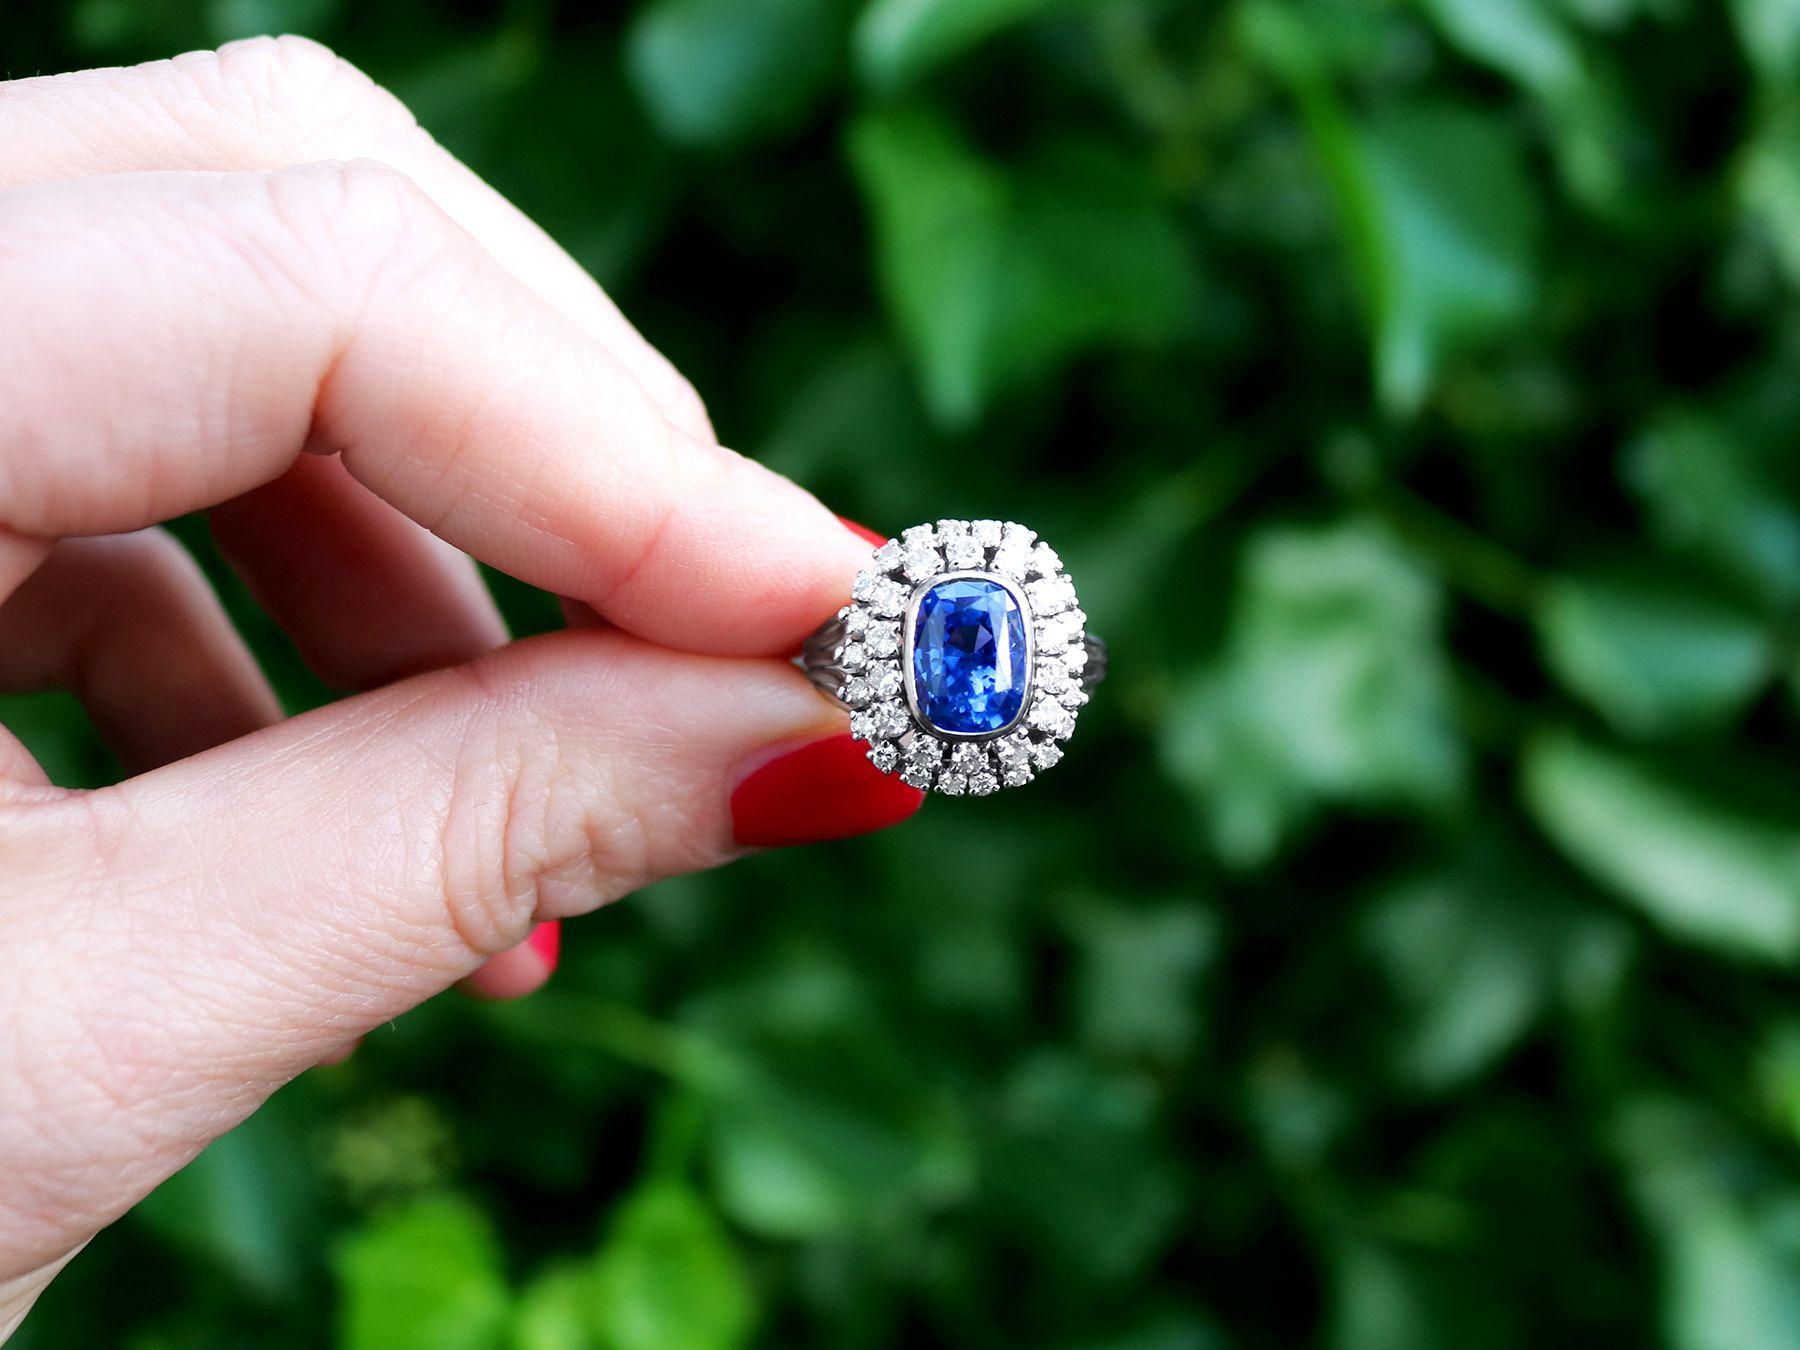 A stunning vintage French 5.40 carat Ceylon sapphire and 1.45 carat diamond, 18 karat white gold dress ring; part of our diverse gemstone jewelry and estate jewelry collections.

This stunning, fine and impressive cushion cut Ceylon sapphire ring